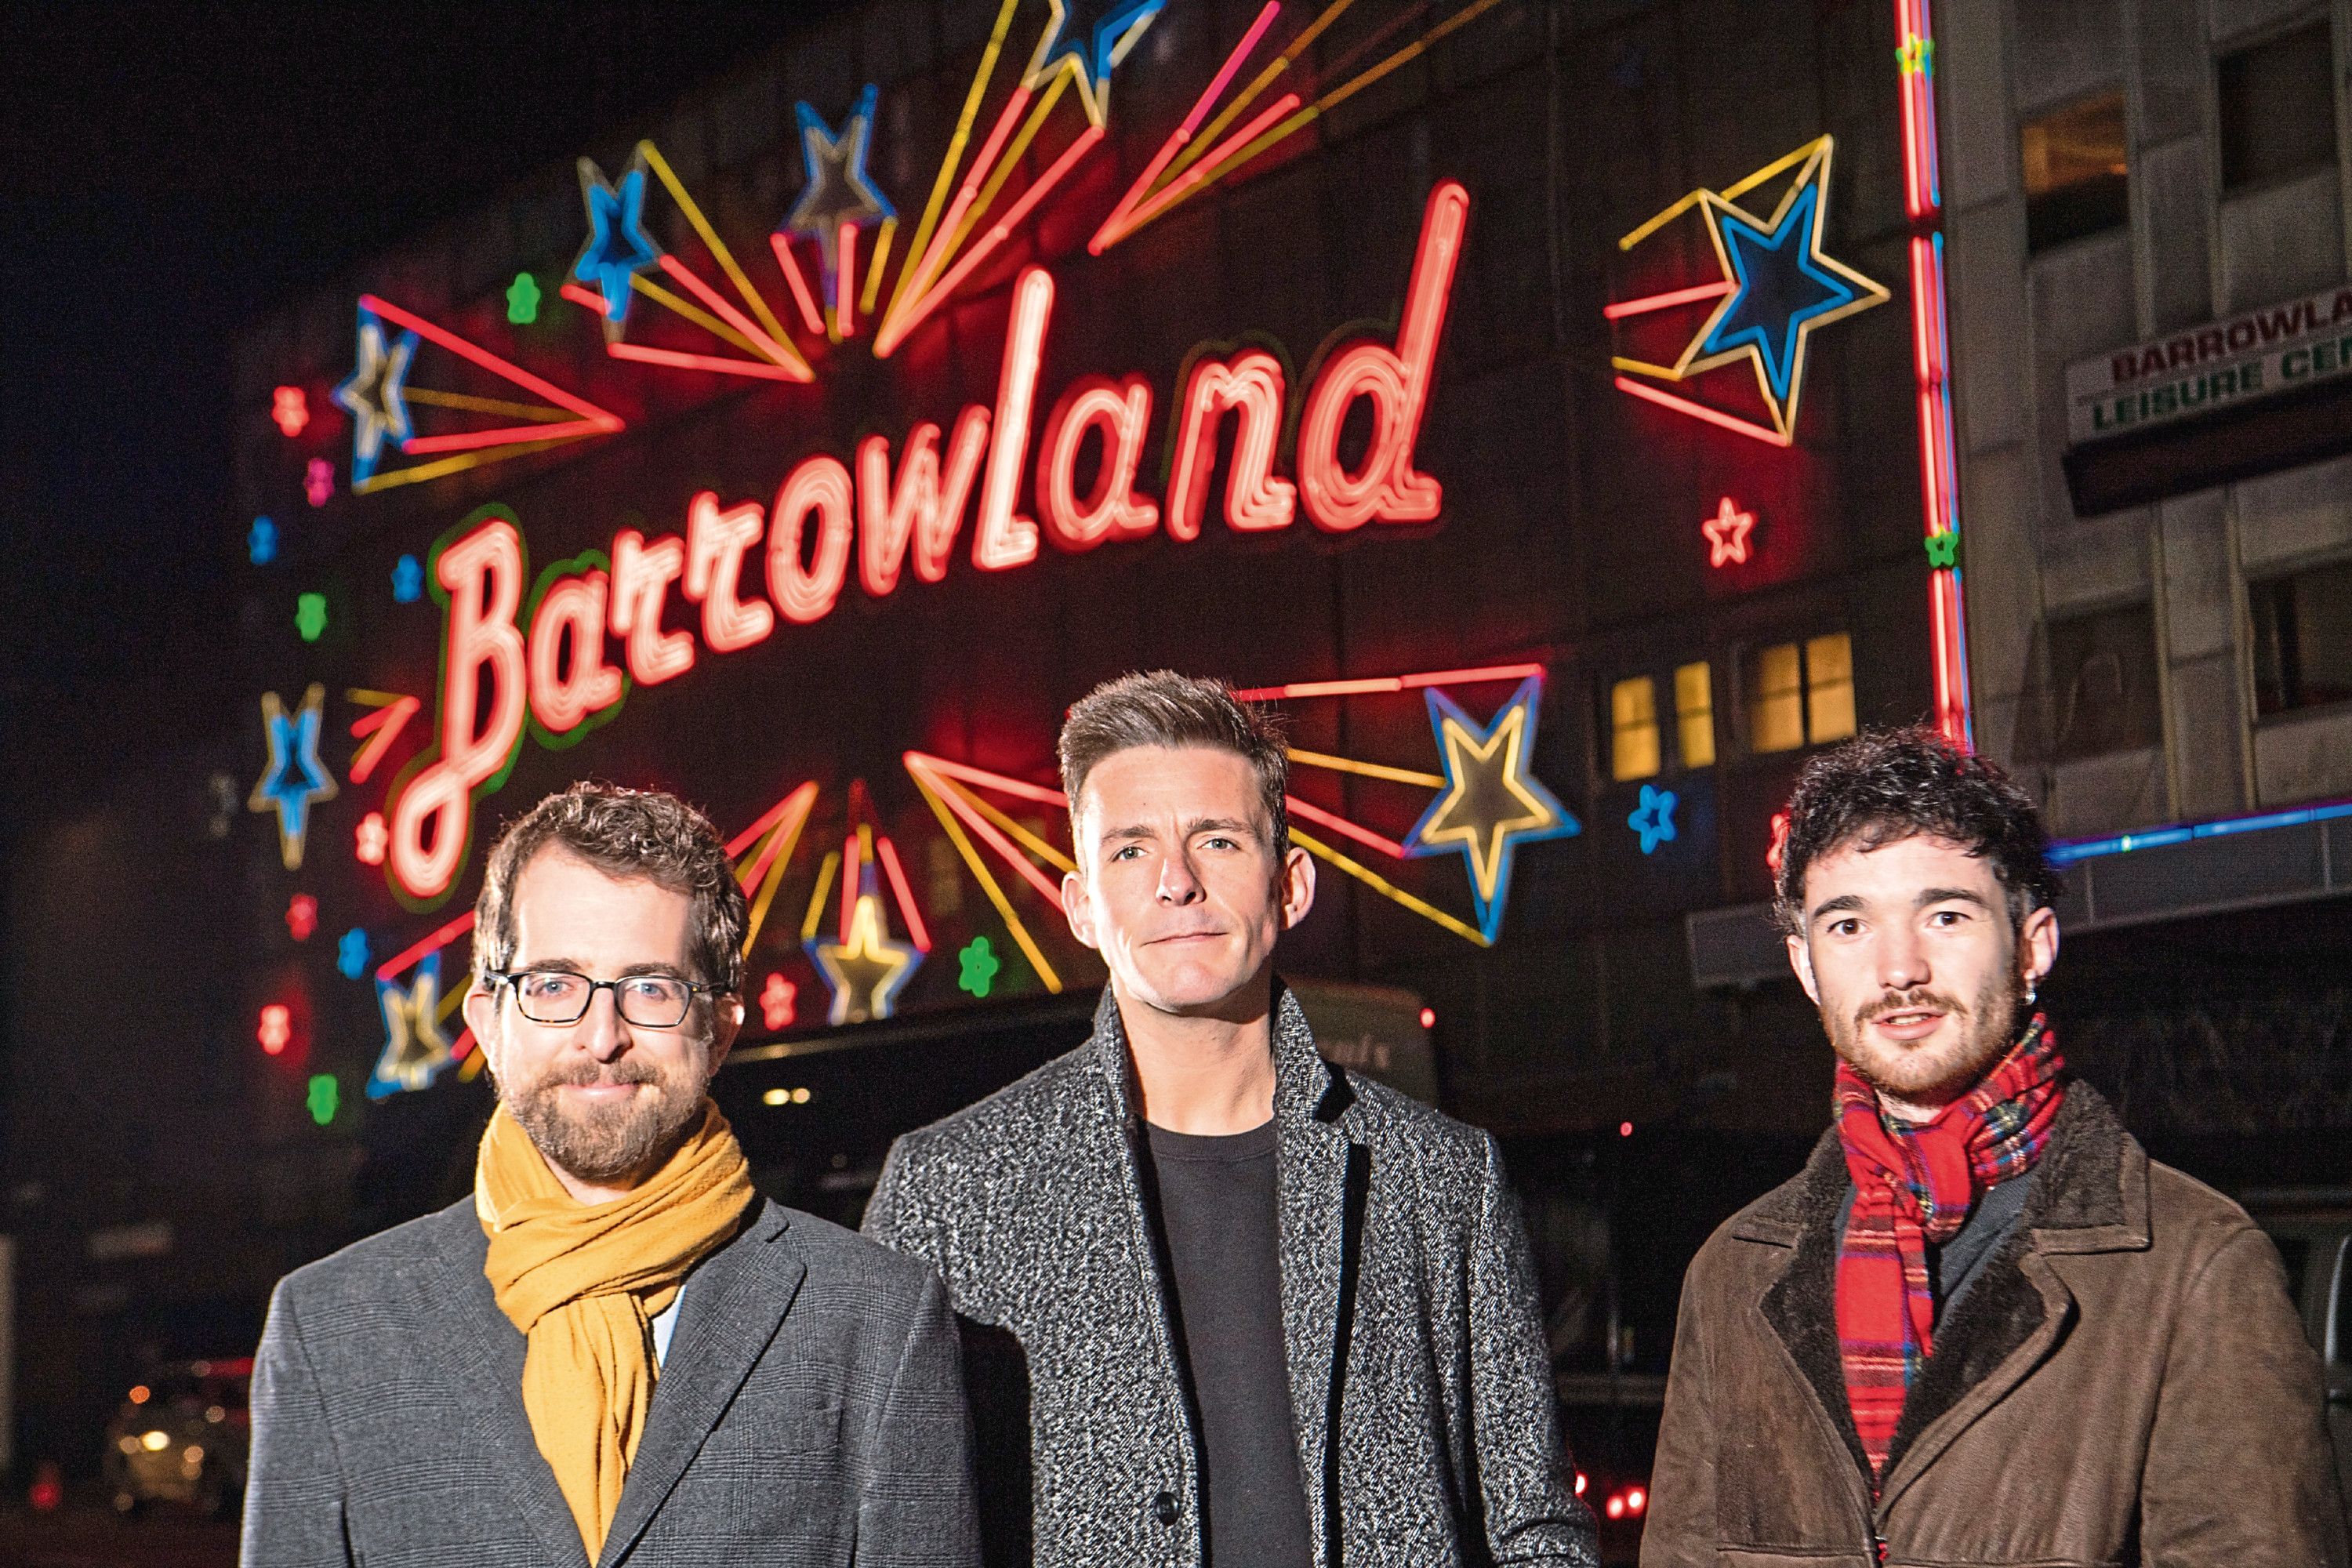 Matt Brennan, a Reader in Popular Music at the University of Glasgow; Glasgow PhD student Robert Allan, also a founding and current member of the band Glasvegas and Robert Kilpatrick, General Manager of the Scottish Music Industry Association (SMIA) in front of the iconic Glasgow Barrowland Ballroom.